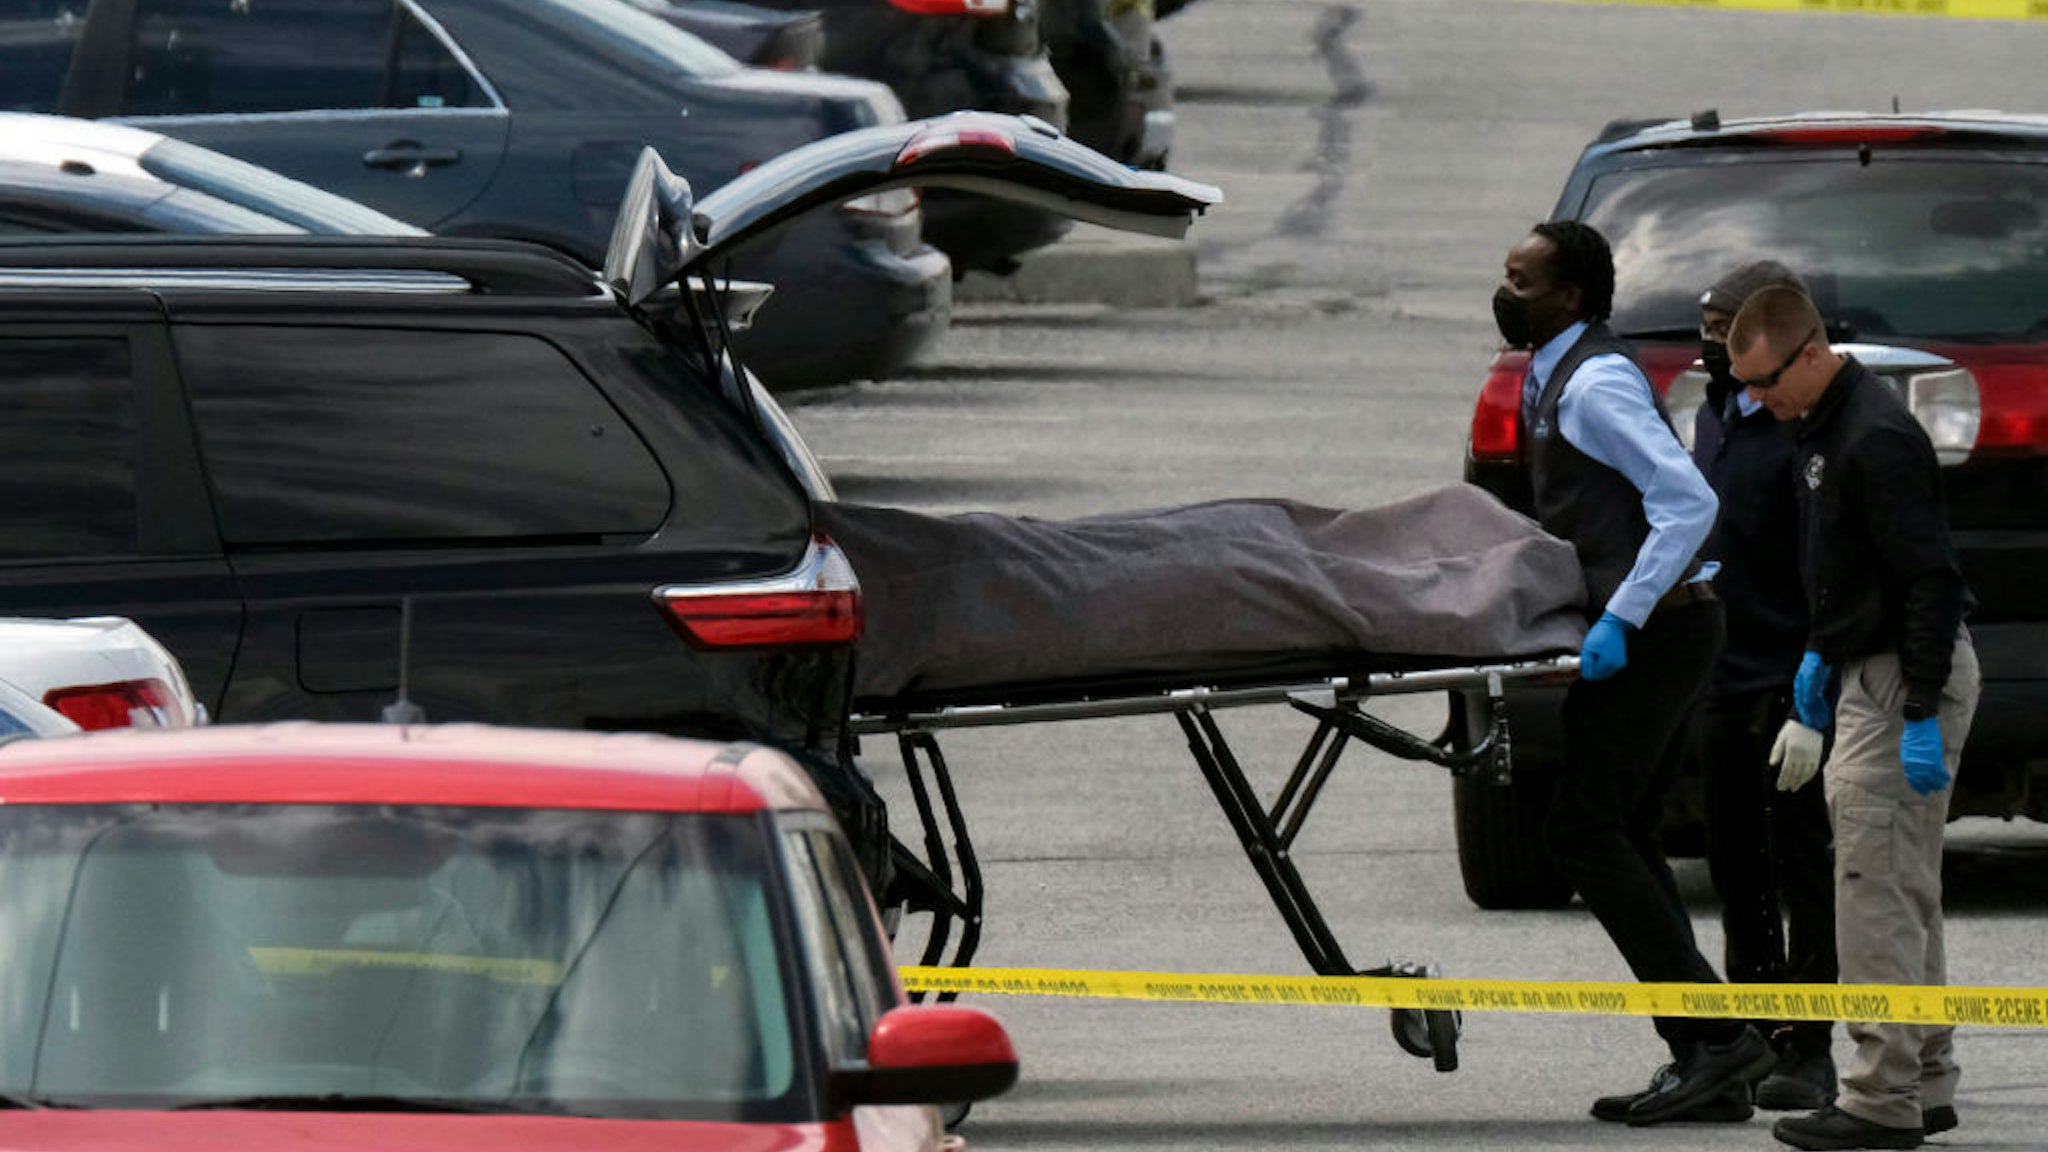 Officials load a body into a vehicle at the site of a mass shooting at a FedEx facility in Indianapolis, Indiana, on April 16, 2021. - A gunman has killed at least eight people at the facility before turning the gun on himself in the latest in a string of mass shootings in the country, authorities said. The incident came a week after President Joe Biden branded US gun violence an "epidemic" and an "international embarrassment" as he waded into the tense debate over gun control, a powerful political issue in the US. (Photo by Jeff Dean / AFP)